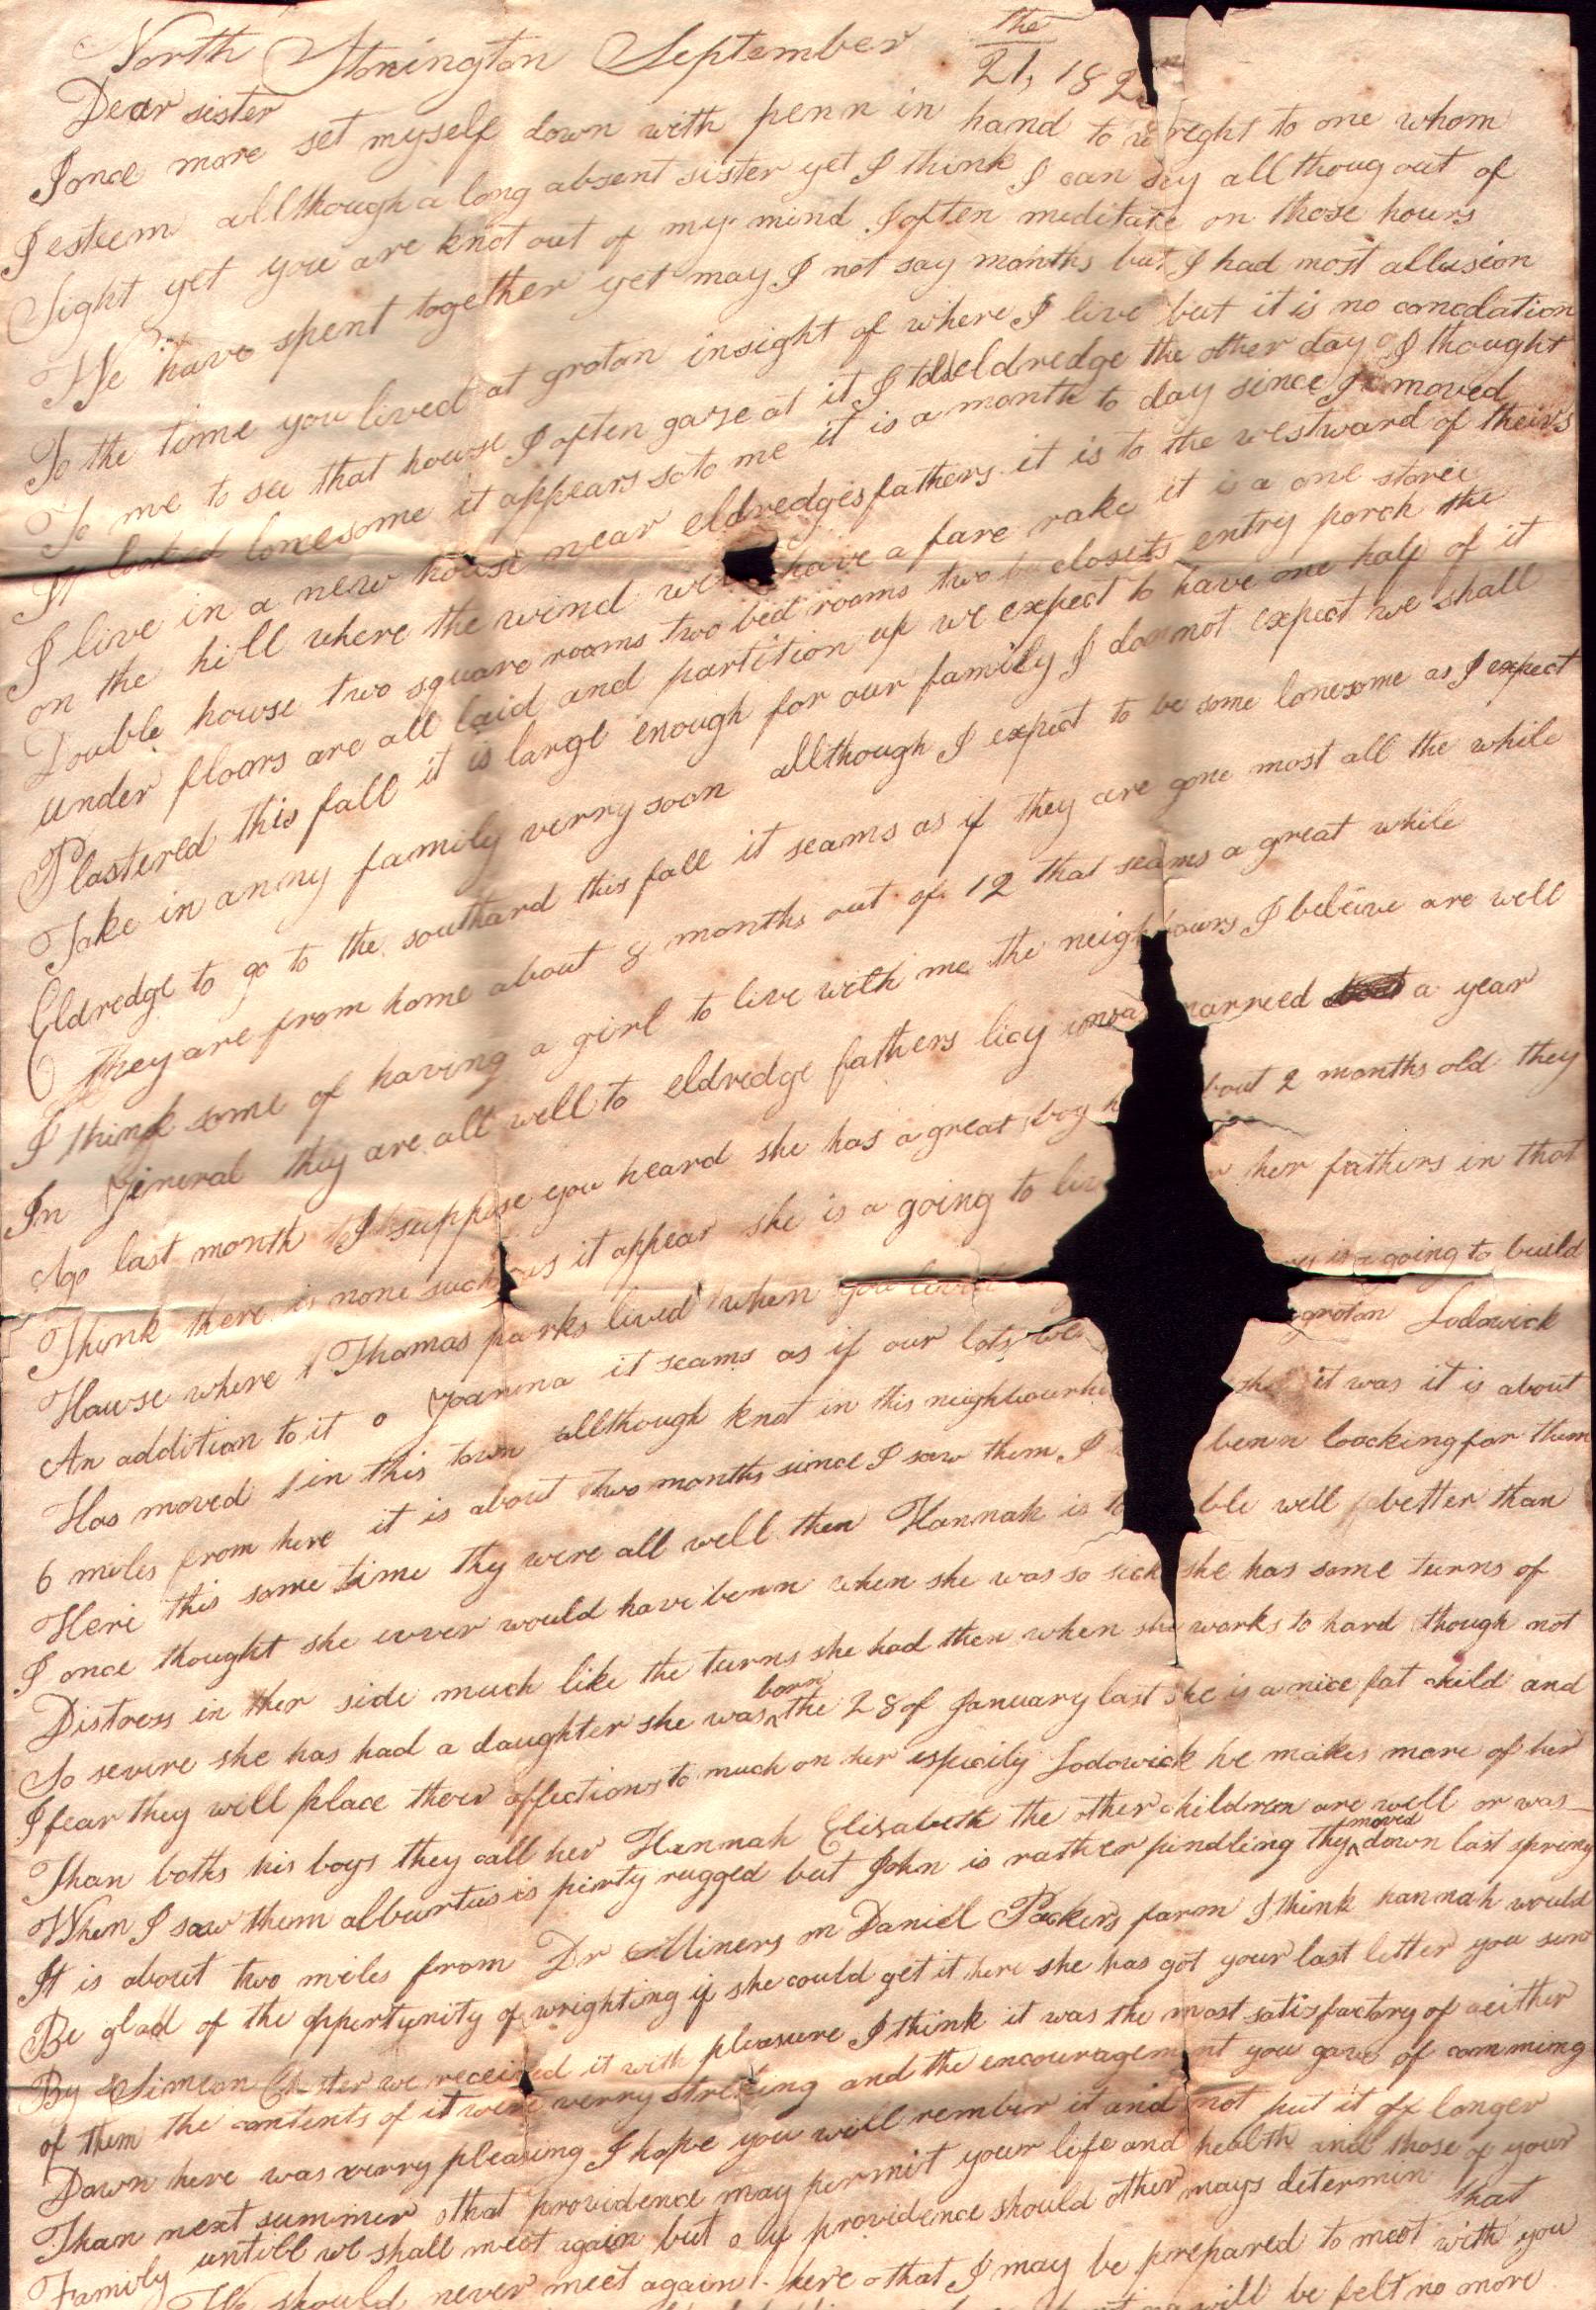 Spicer, Lydia (Stanton) - 1825 Letter to her sister, Joanna (Stanton) Fish in Brooklyn, Cuyahoga County, Ohio